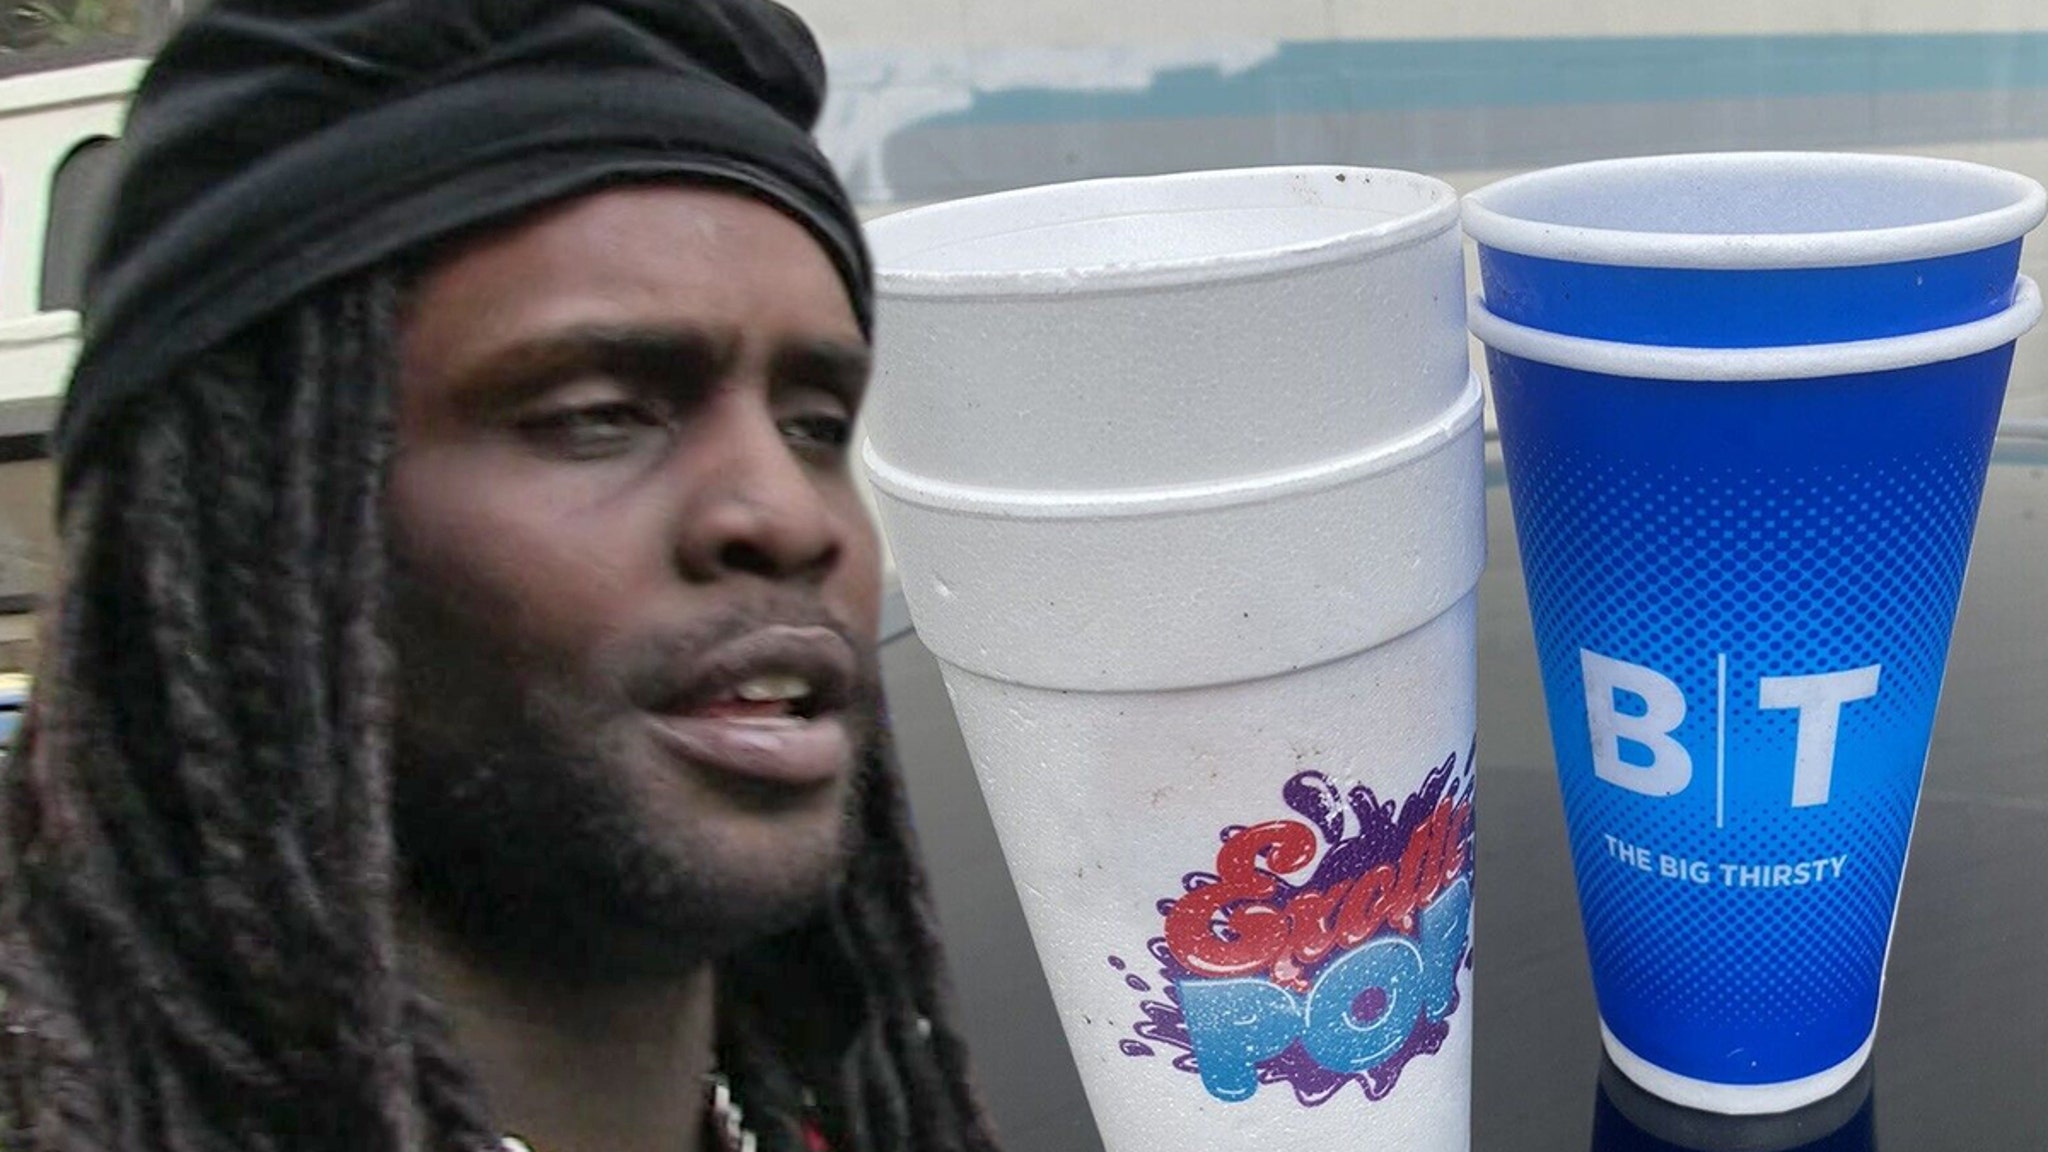 Chief Keef Fan Dumpster dives for double cups, eBay sale